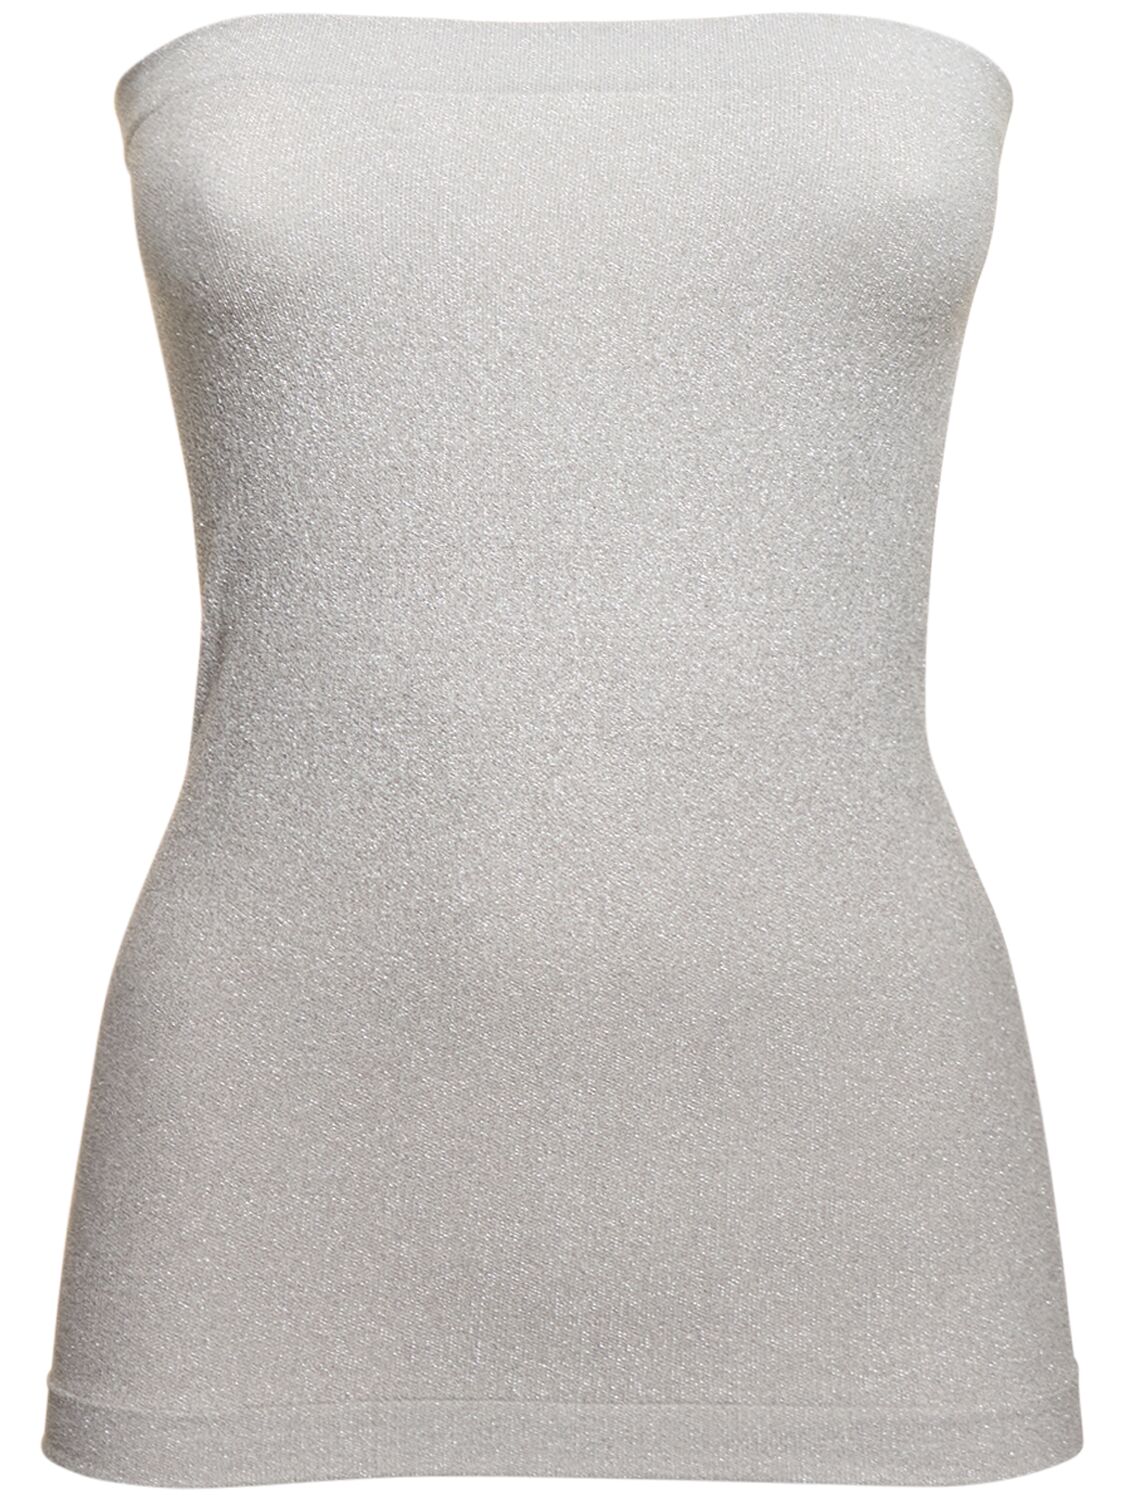 Image of Fading Shine Strapless Top